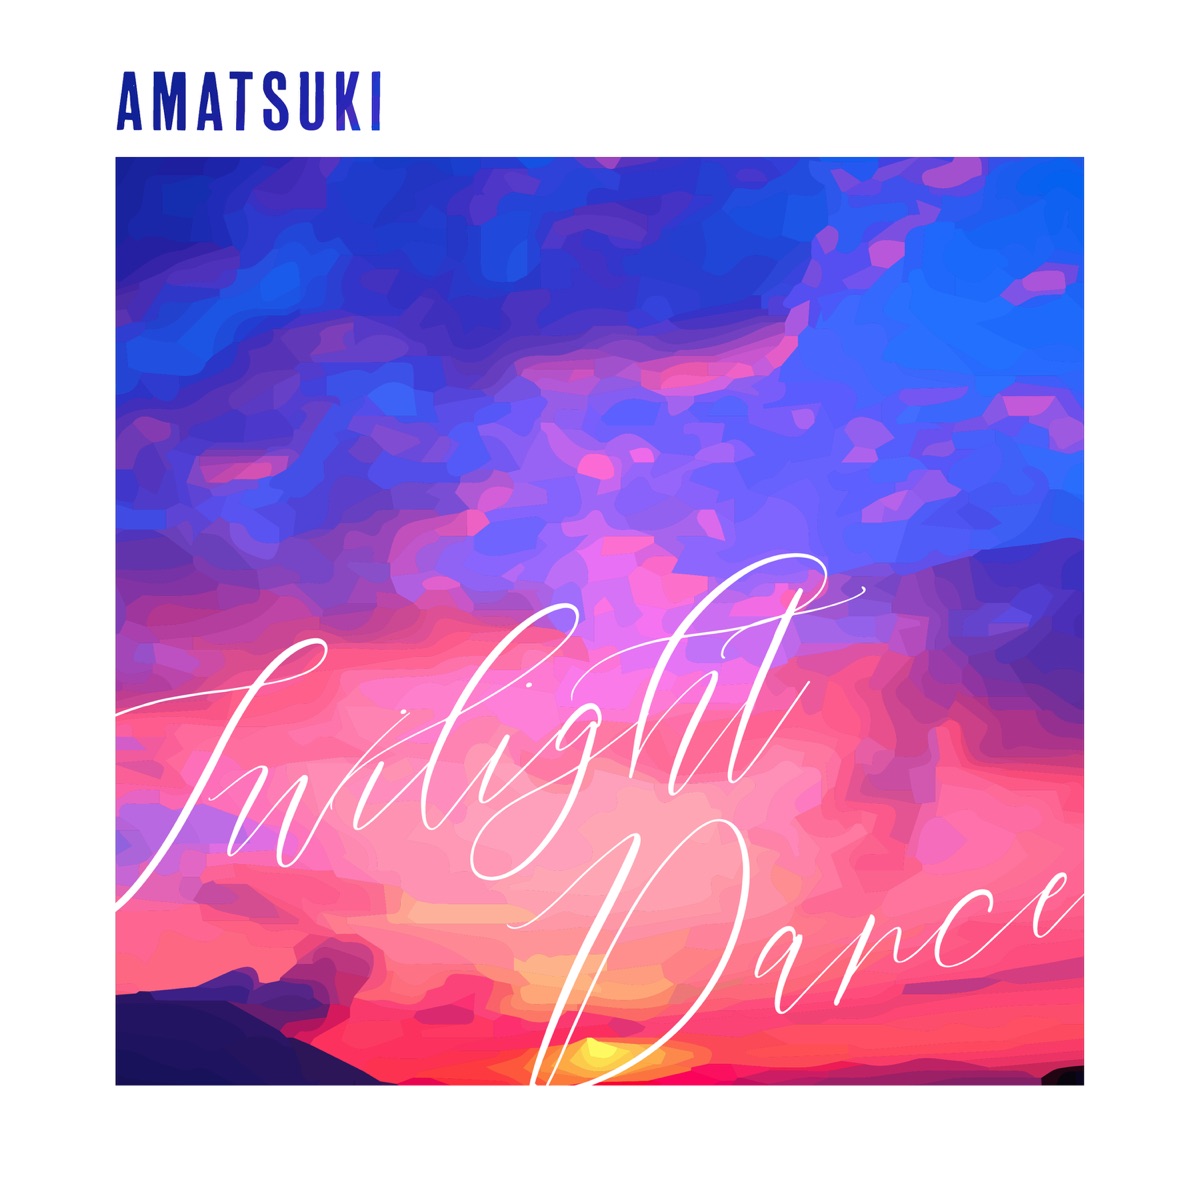 Cover art for『Amatsuki - Twilight Dance』from the release『Twilight Dance』